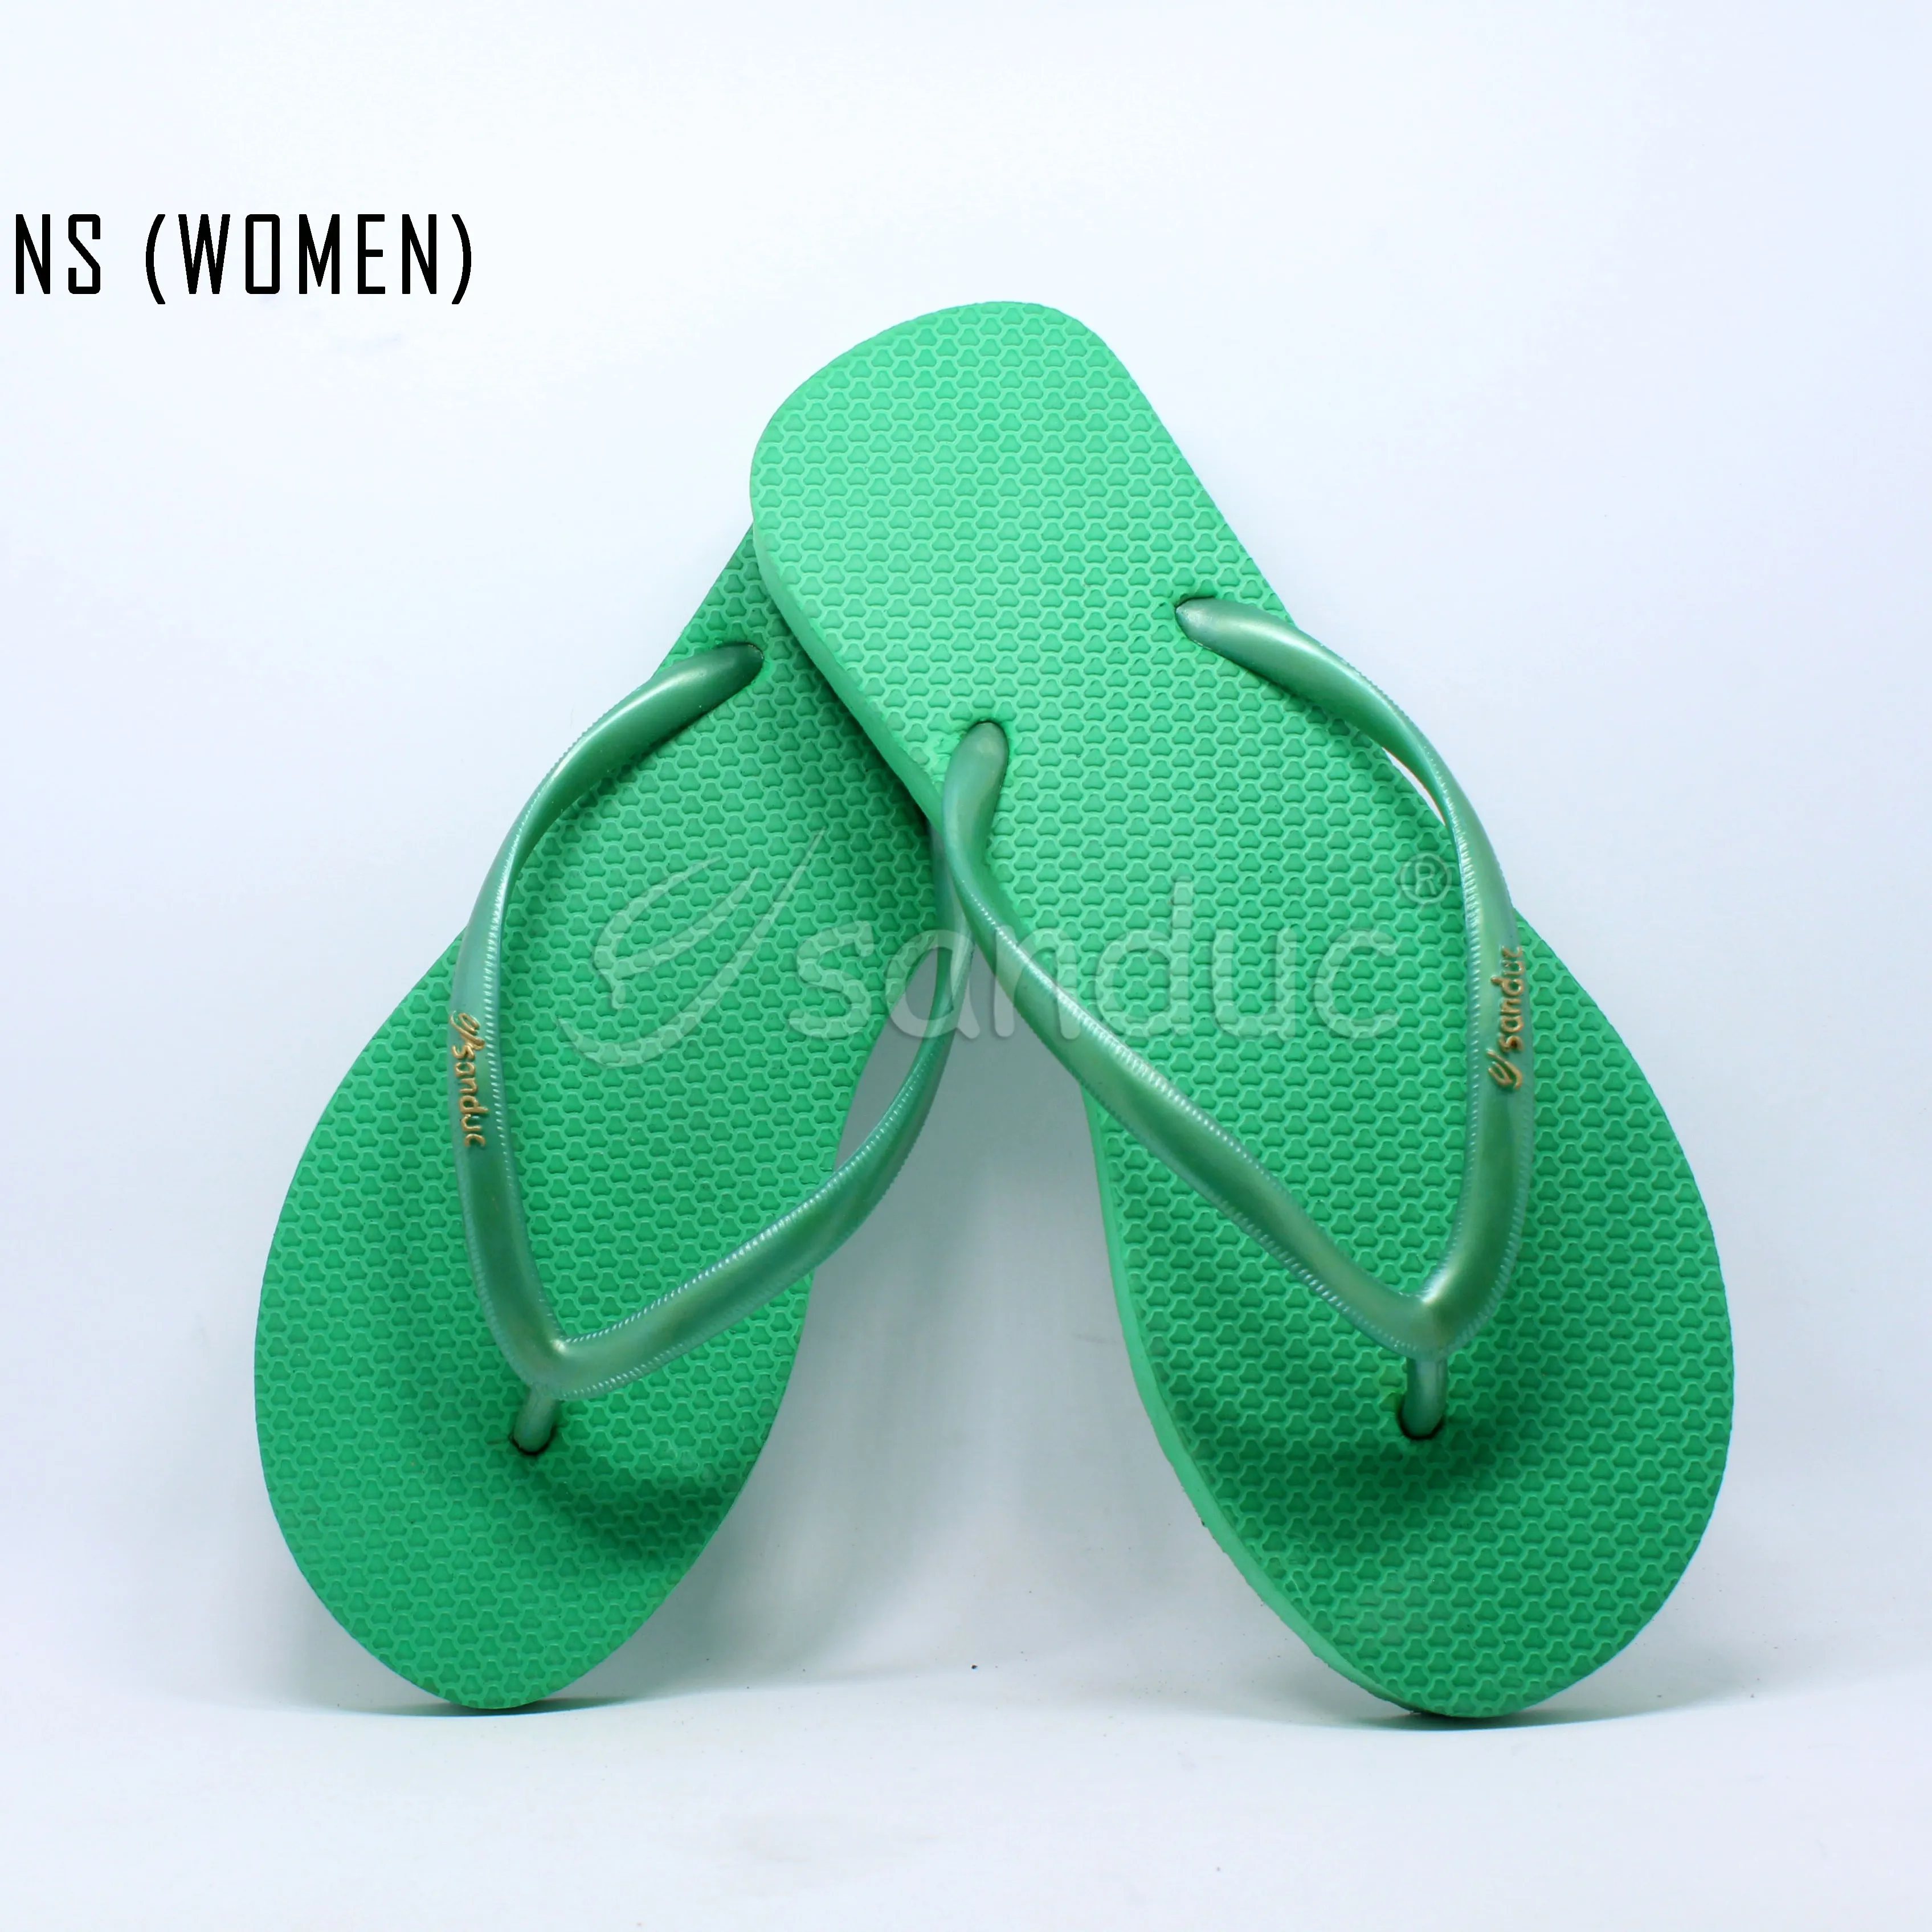 SUMMER WOMEN COLORFUL RUBBER SHOES SLIPPERS LADY FASHION FLIP FLOPS